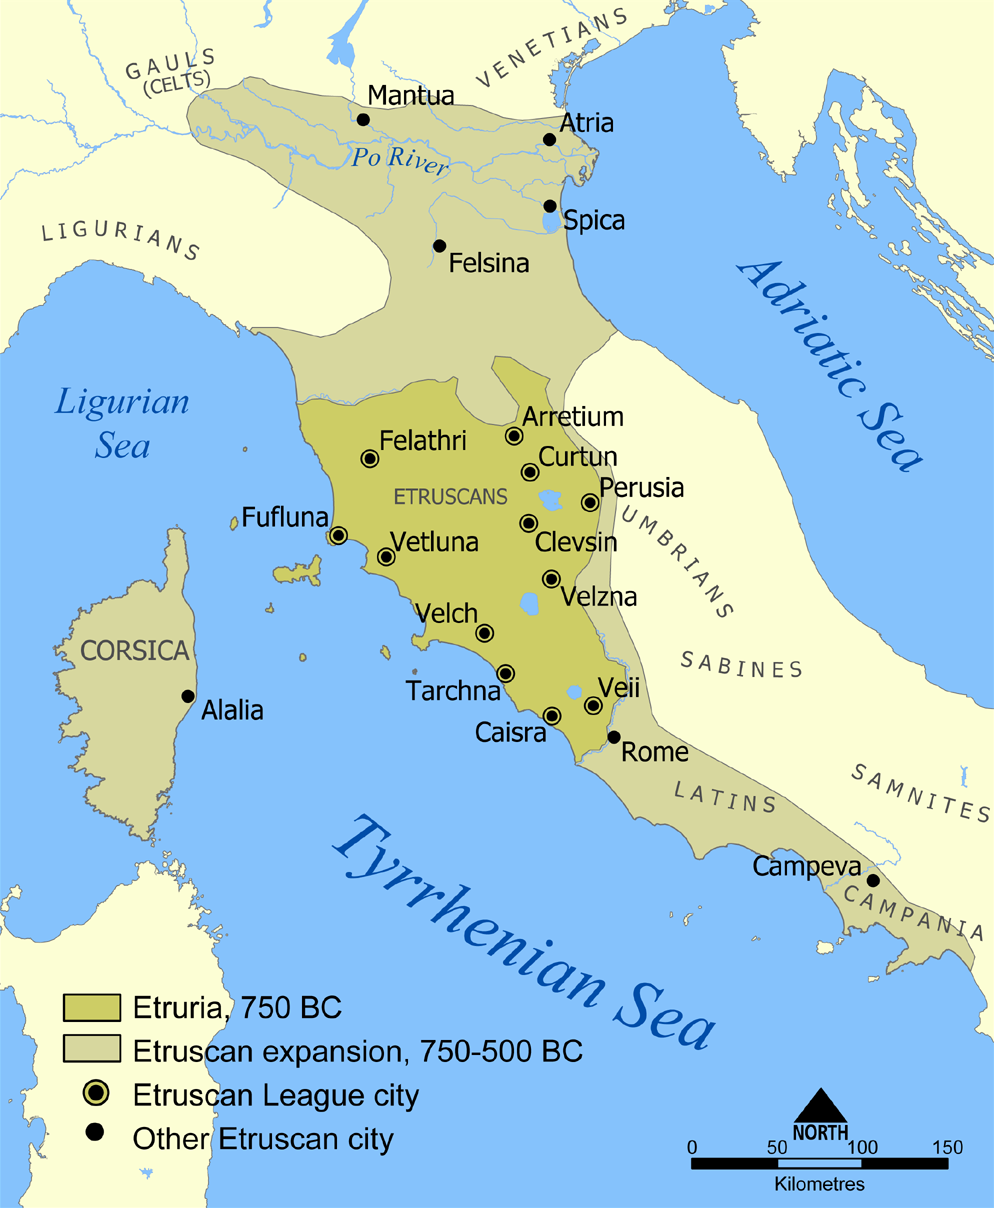 From the 8th-6th century BCE, Etruscan territories extended from the Po River valley in the North, to Campania in the South. Ref: (a-vi).